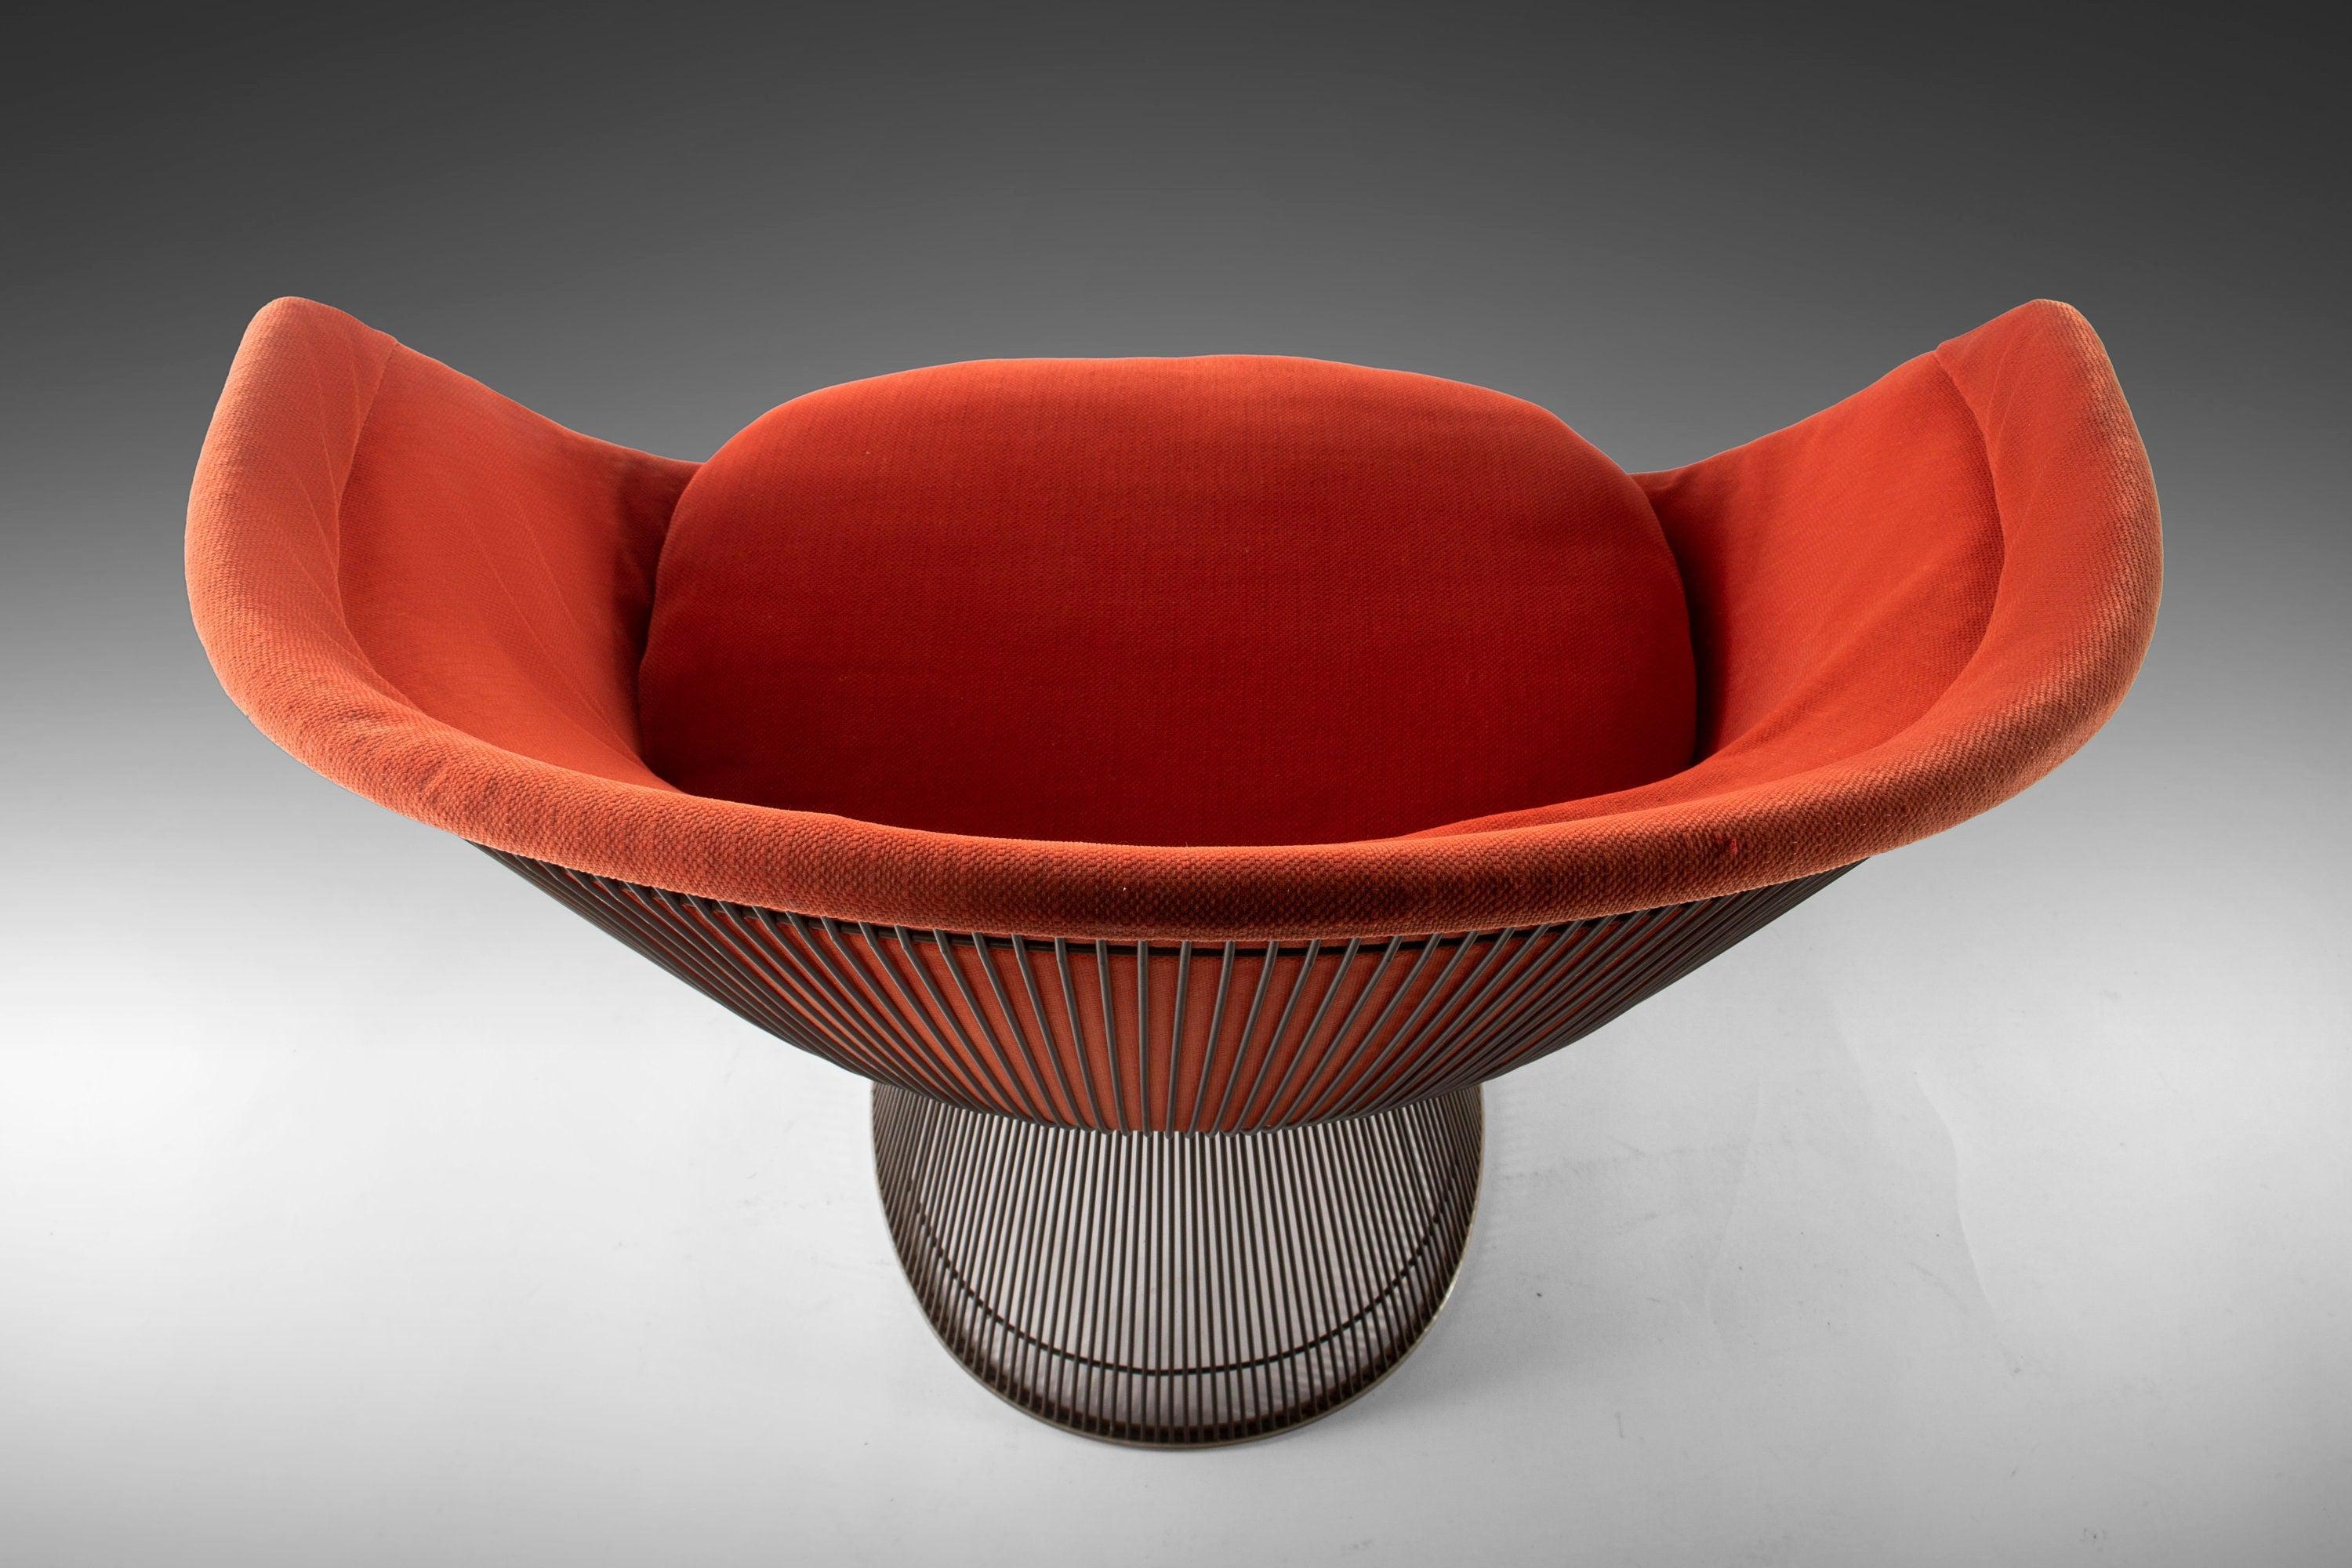 Mid-Century Modern Set of 2 Lounge Chairs by Warren Platner for Knoll in Original Fabric, c. 1966 For Sale